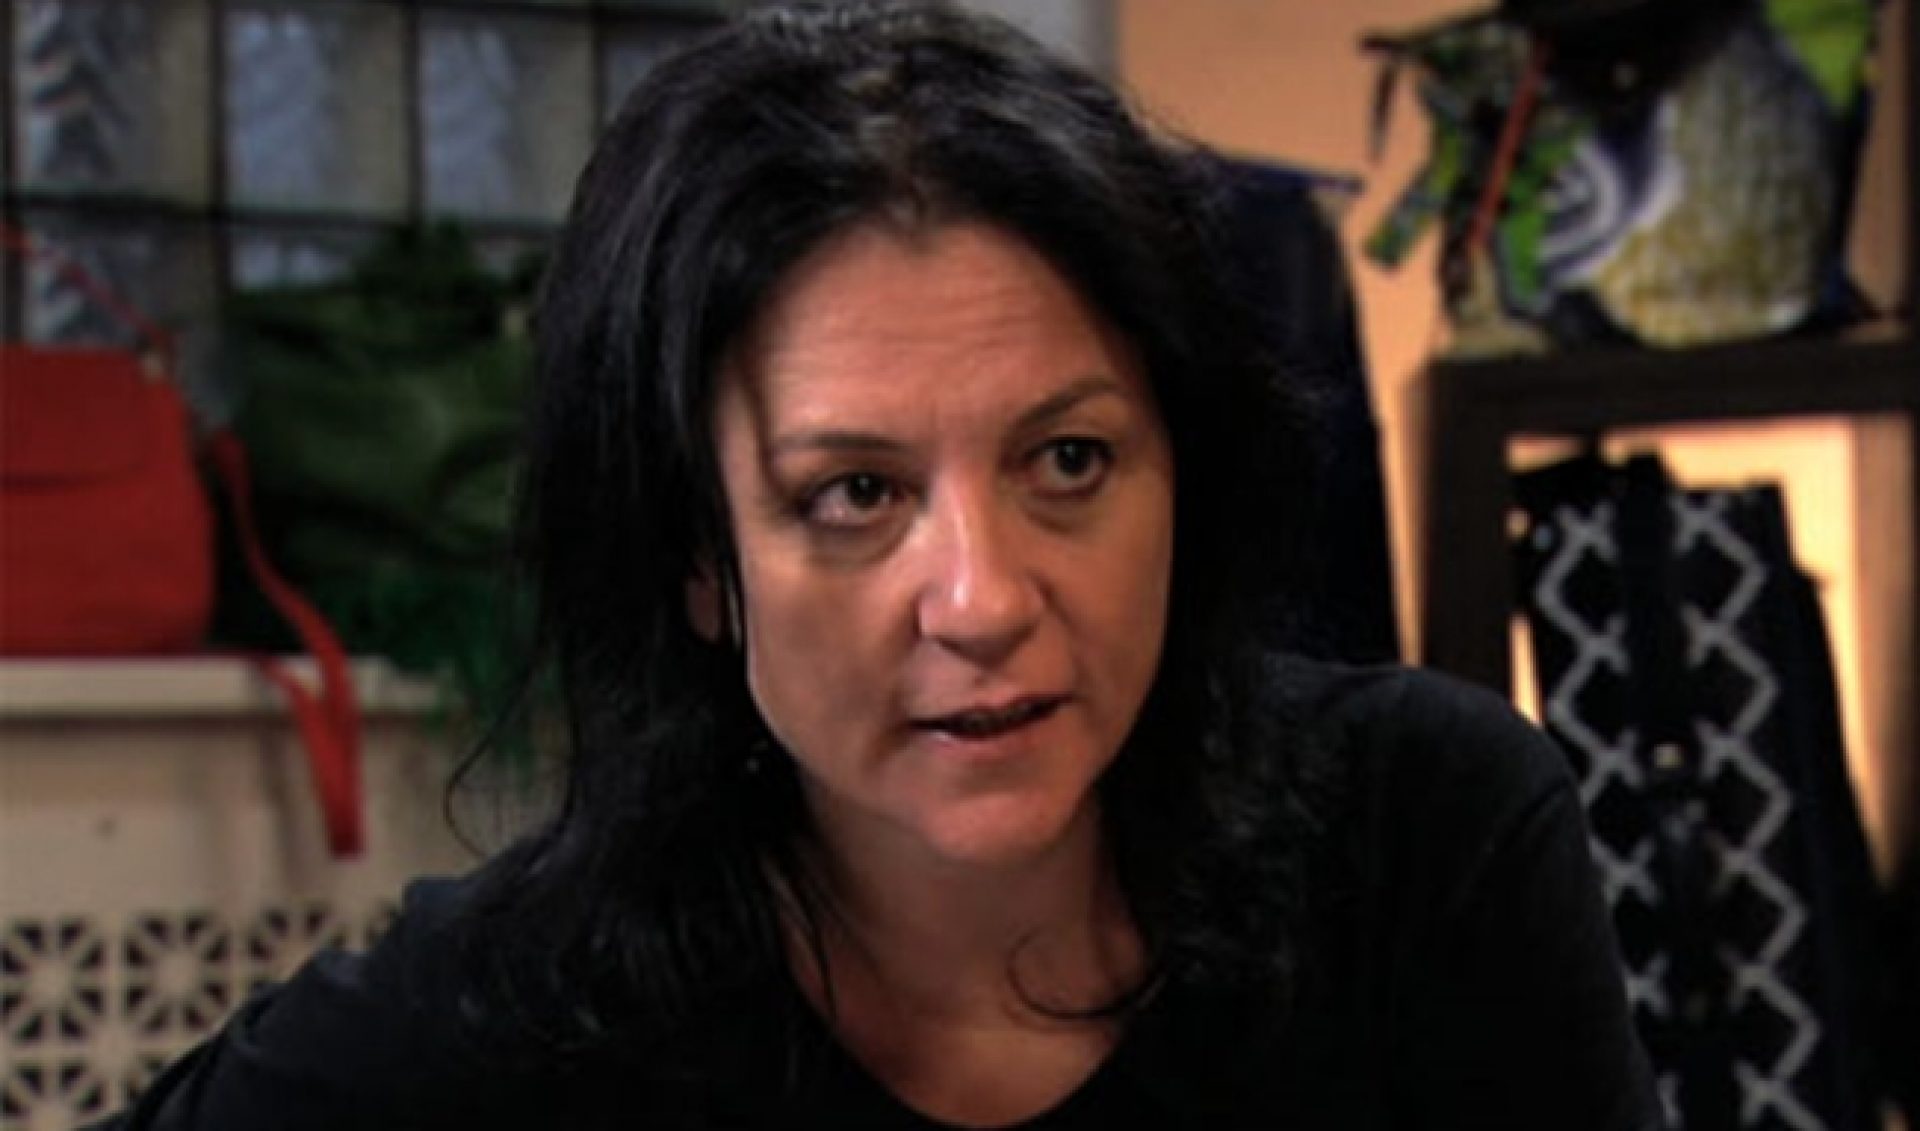 CW Seed Adds Talk Show From Kelly Cutrone To Upcoming Slate